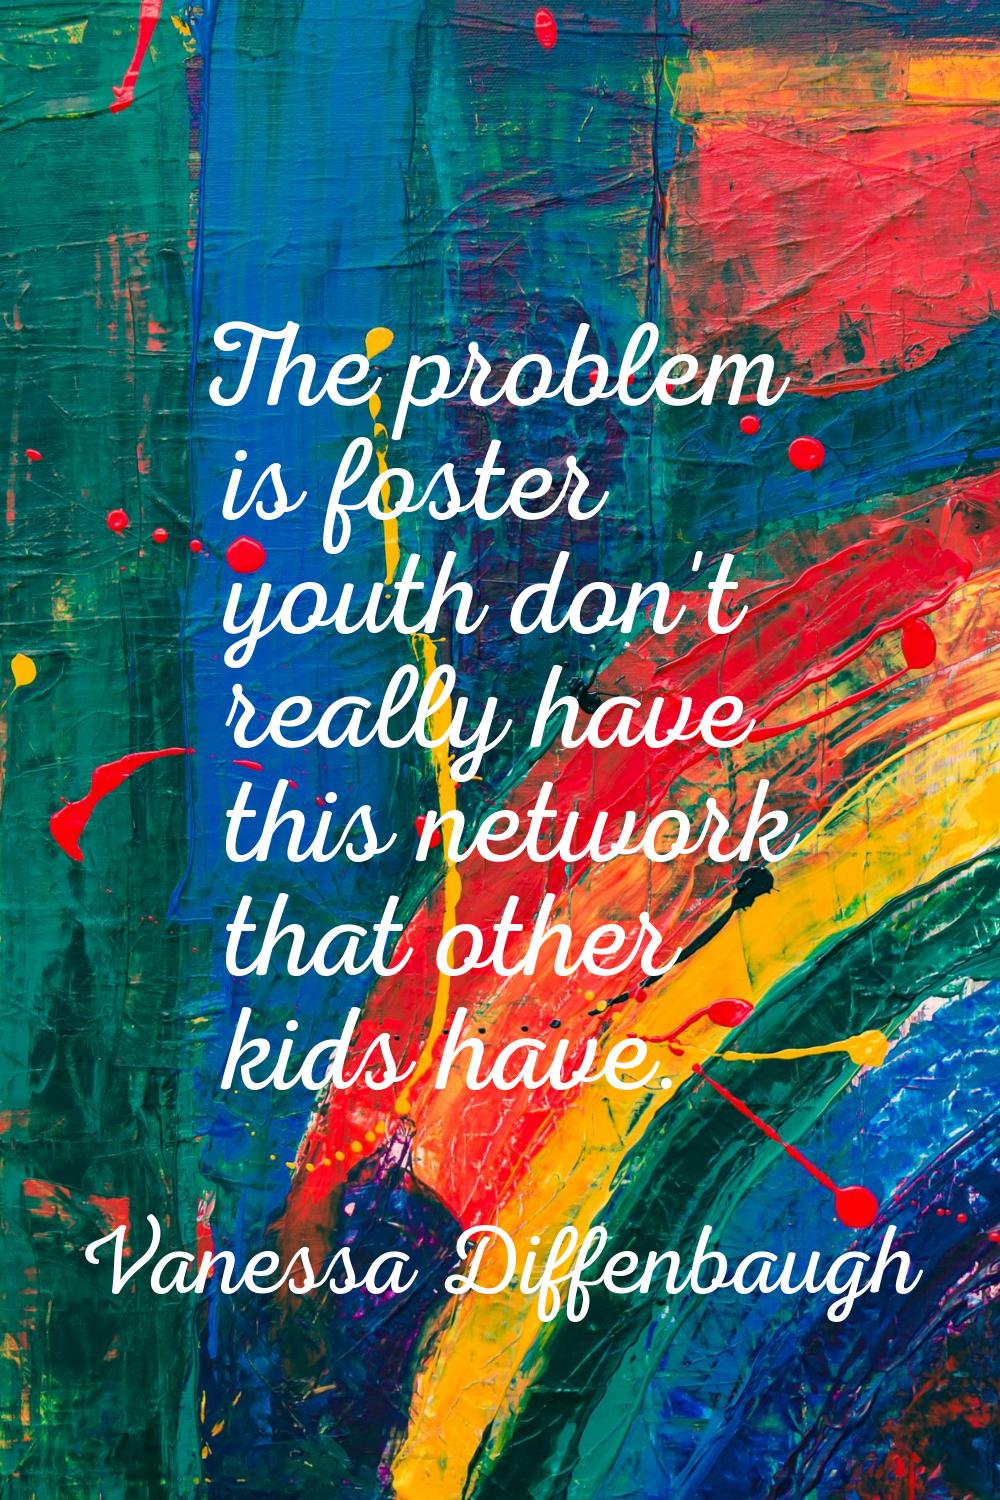 The problem is foster youth don't really have this network that other kids have.